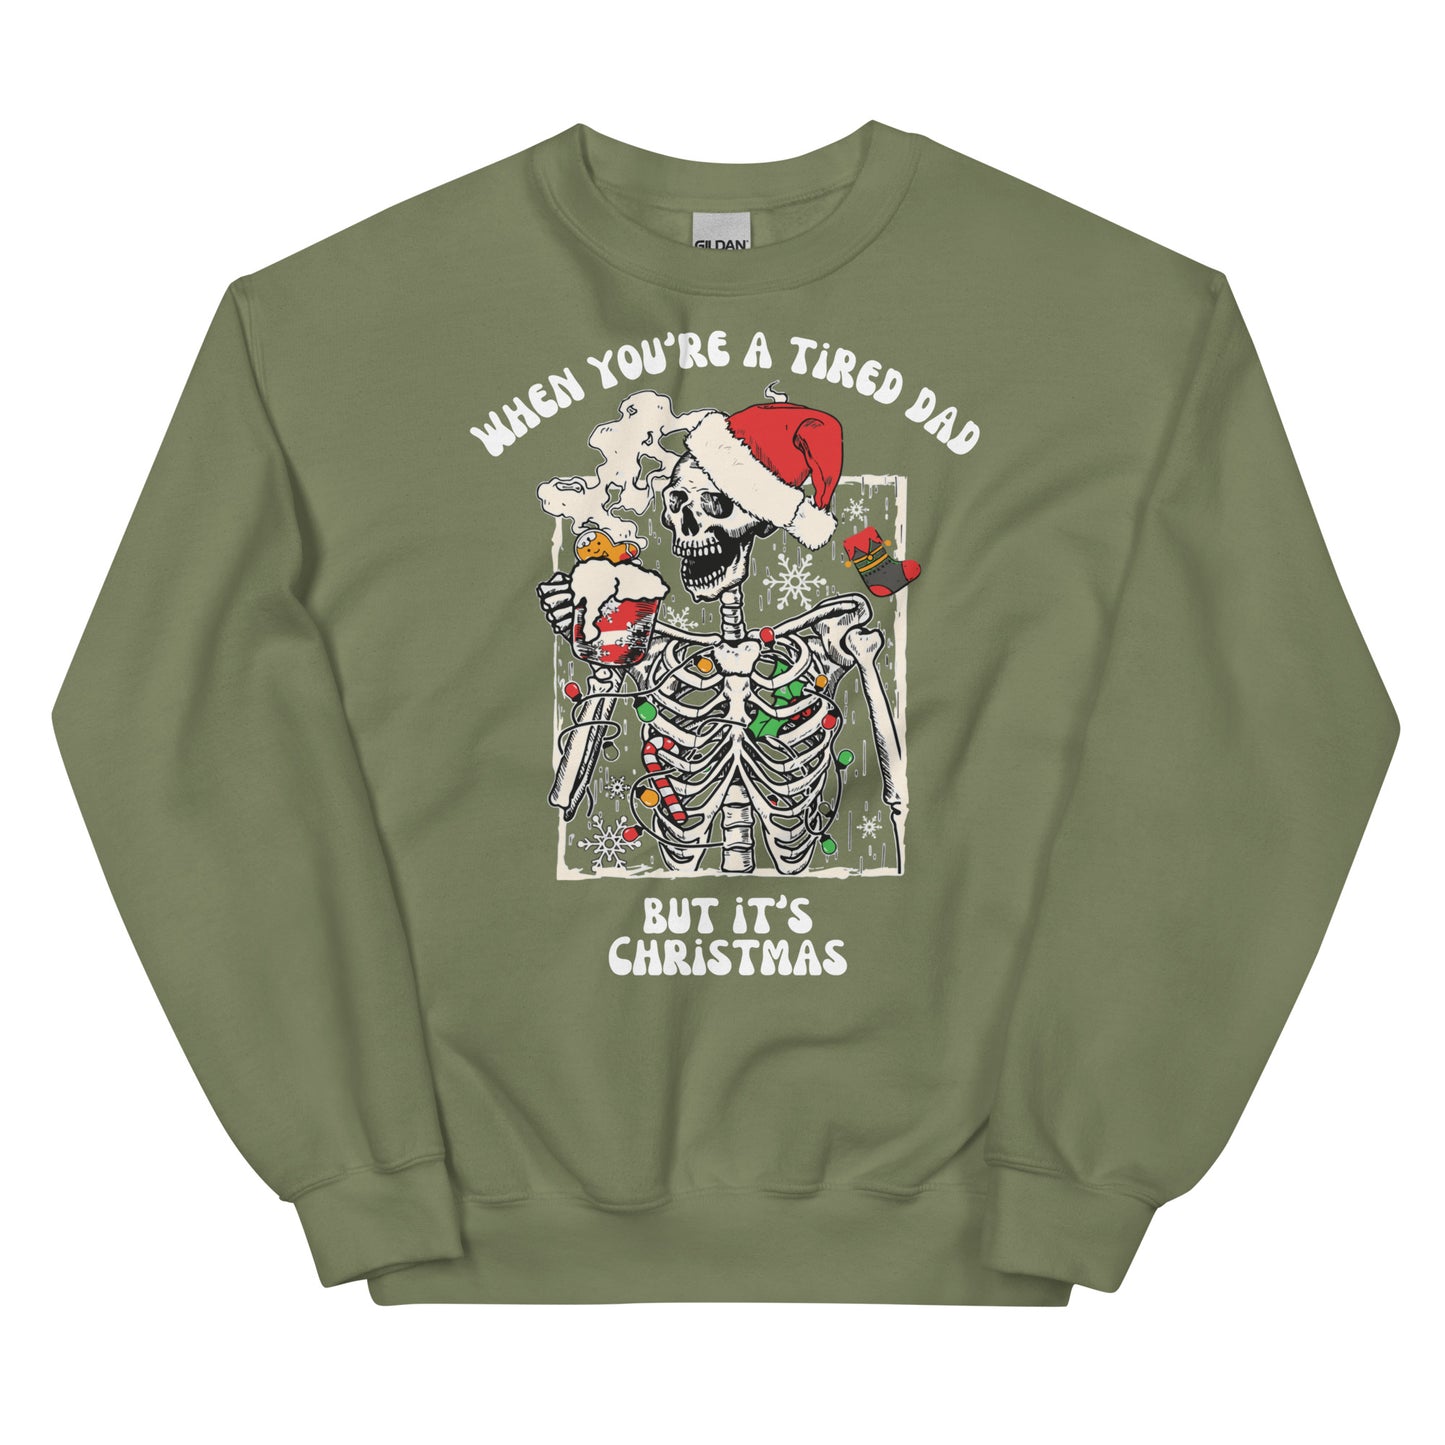 "When You're A Tired Dad." Holiday Sweatshirt